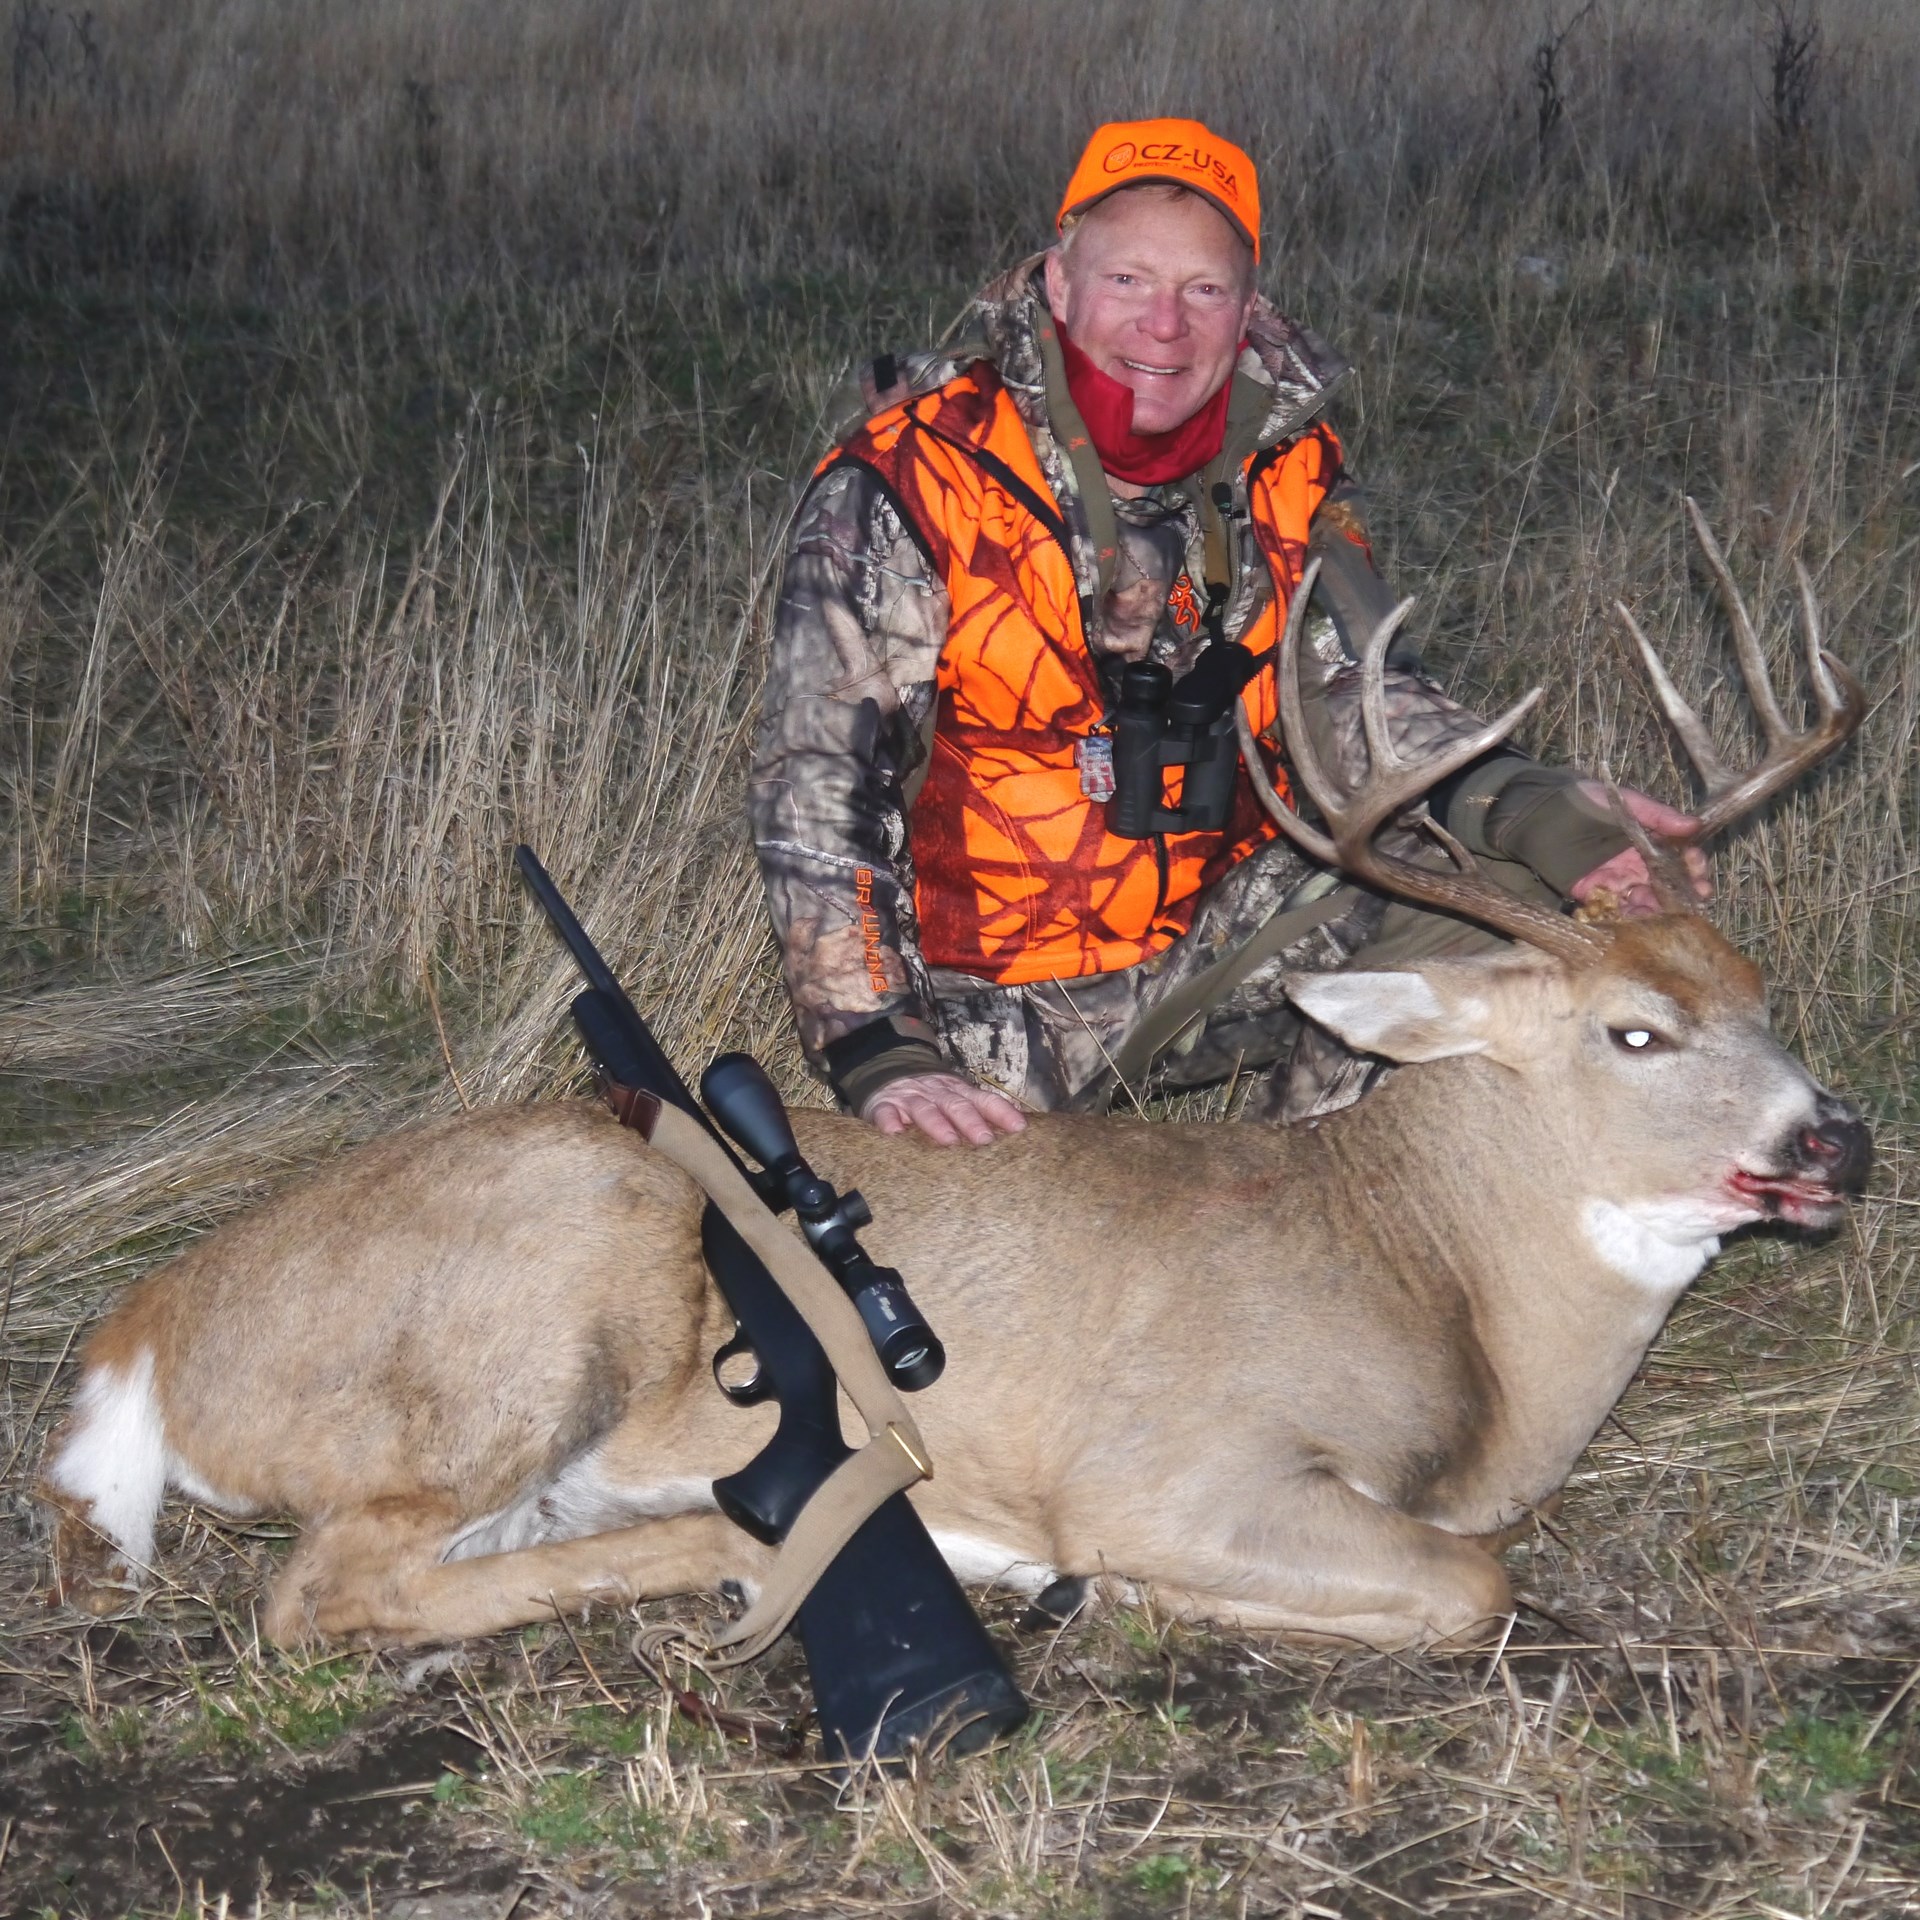 Across North America the basic bolt-action has become the most popular hunting rifle. A nice Montana whitetail, shown above, taken with a CZ 557 in .270 Winchester.